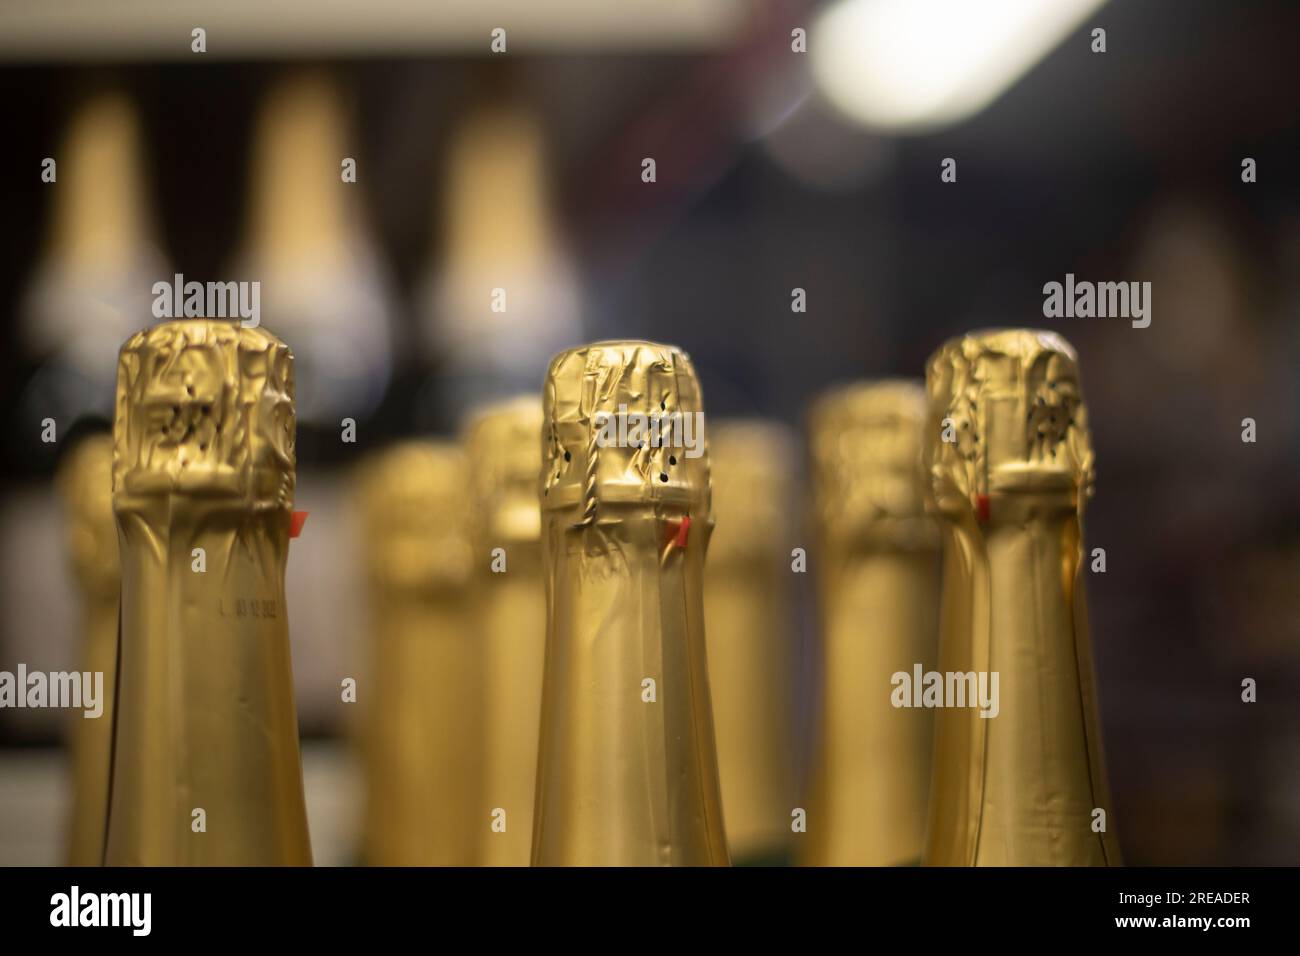 Champagne with gold foil. Bottles of wine in store. Alcoholic beverage stands in row. Bottle sales details. Stock Photo